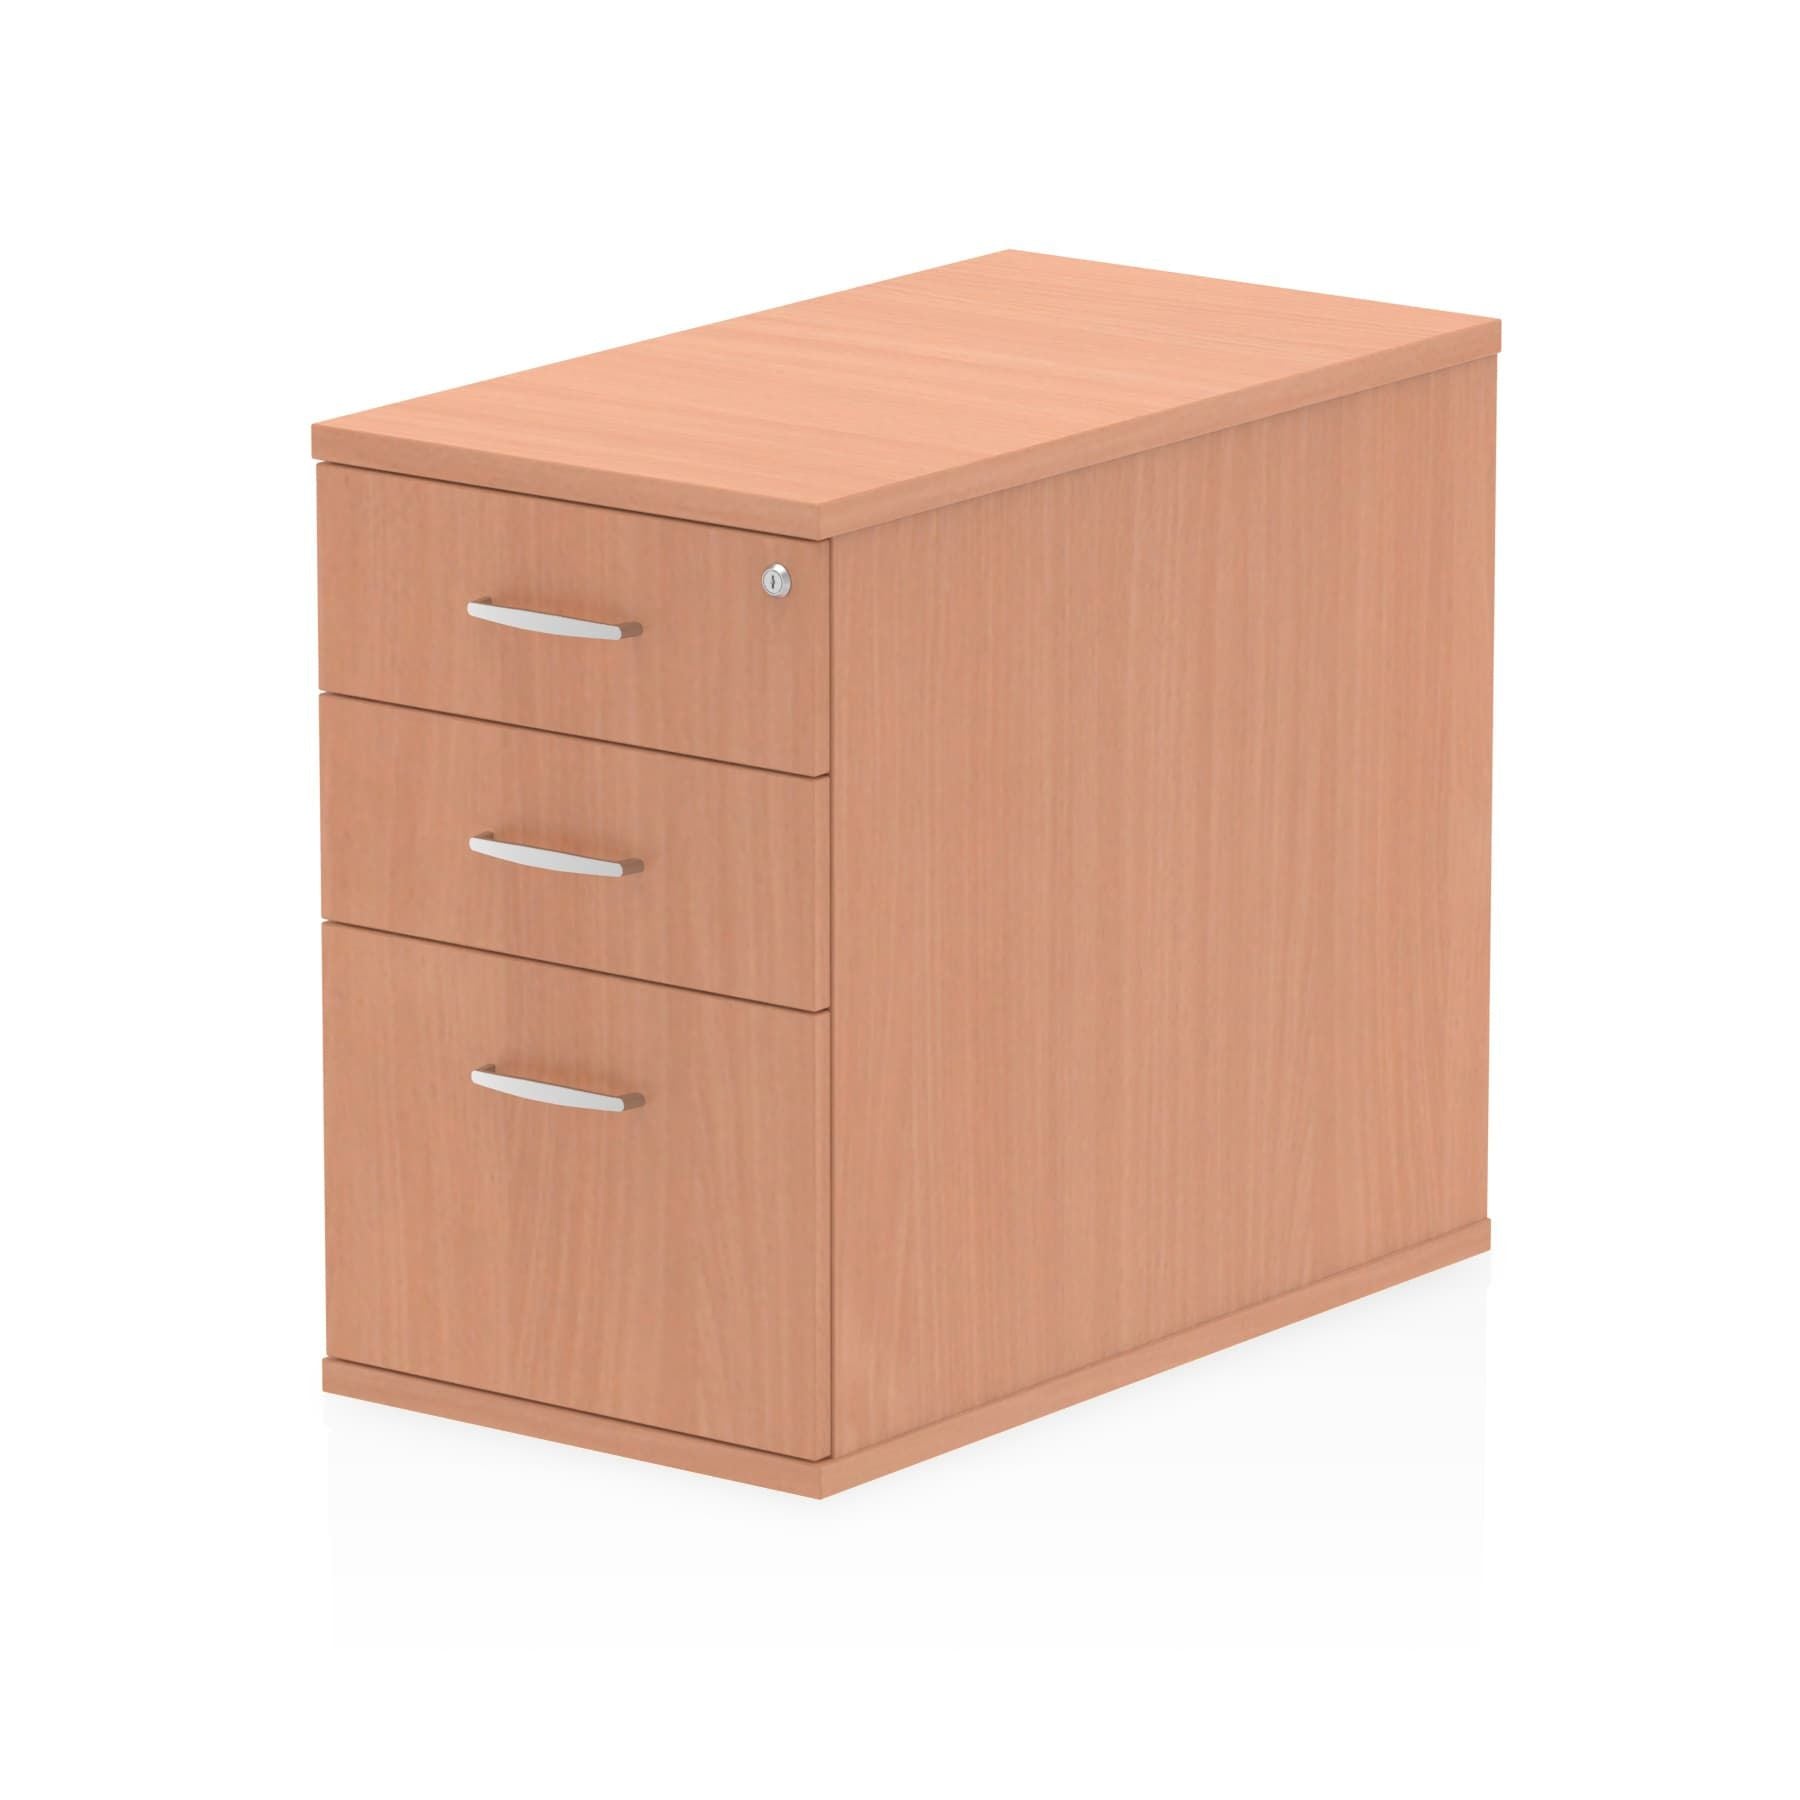 Impulse Desk High Pedestal - 3 Lockable Drawers, MFC Material, 430x600/800x730mm, 25mm Thickness, 5-Year Guarantee